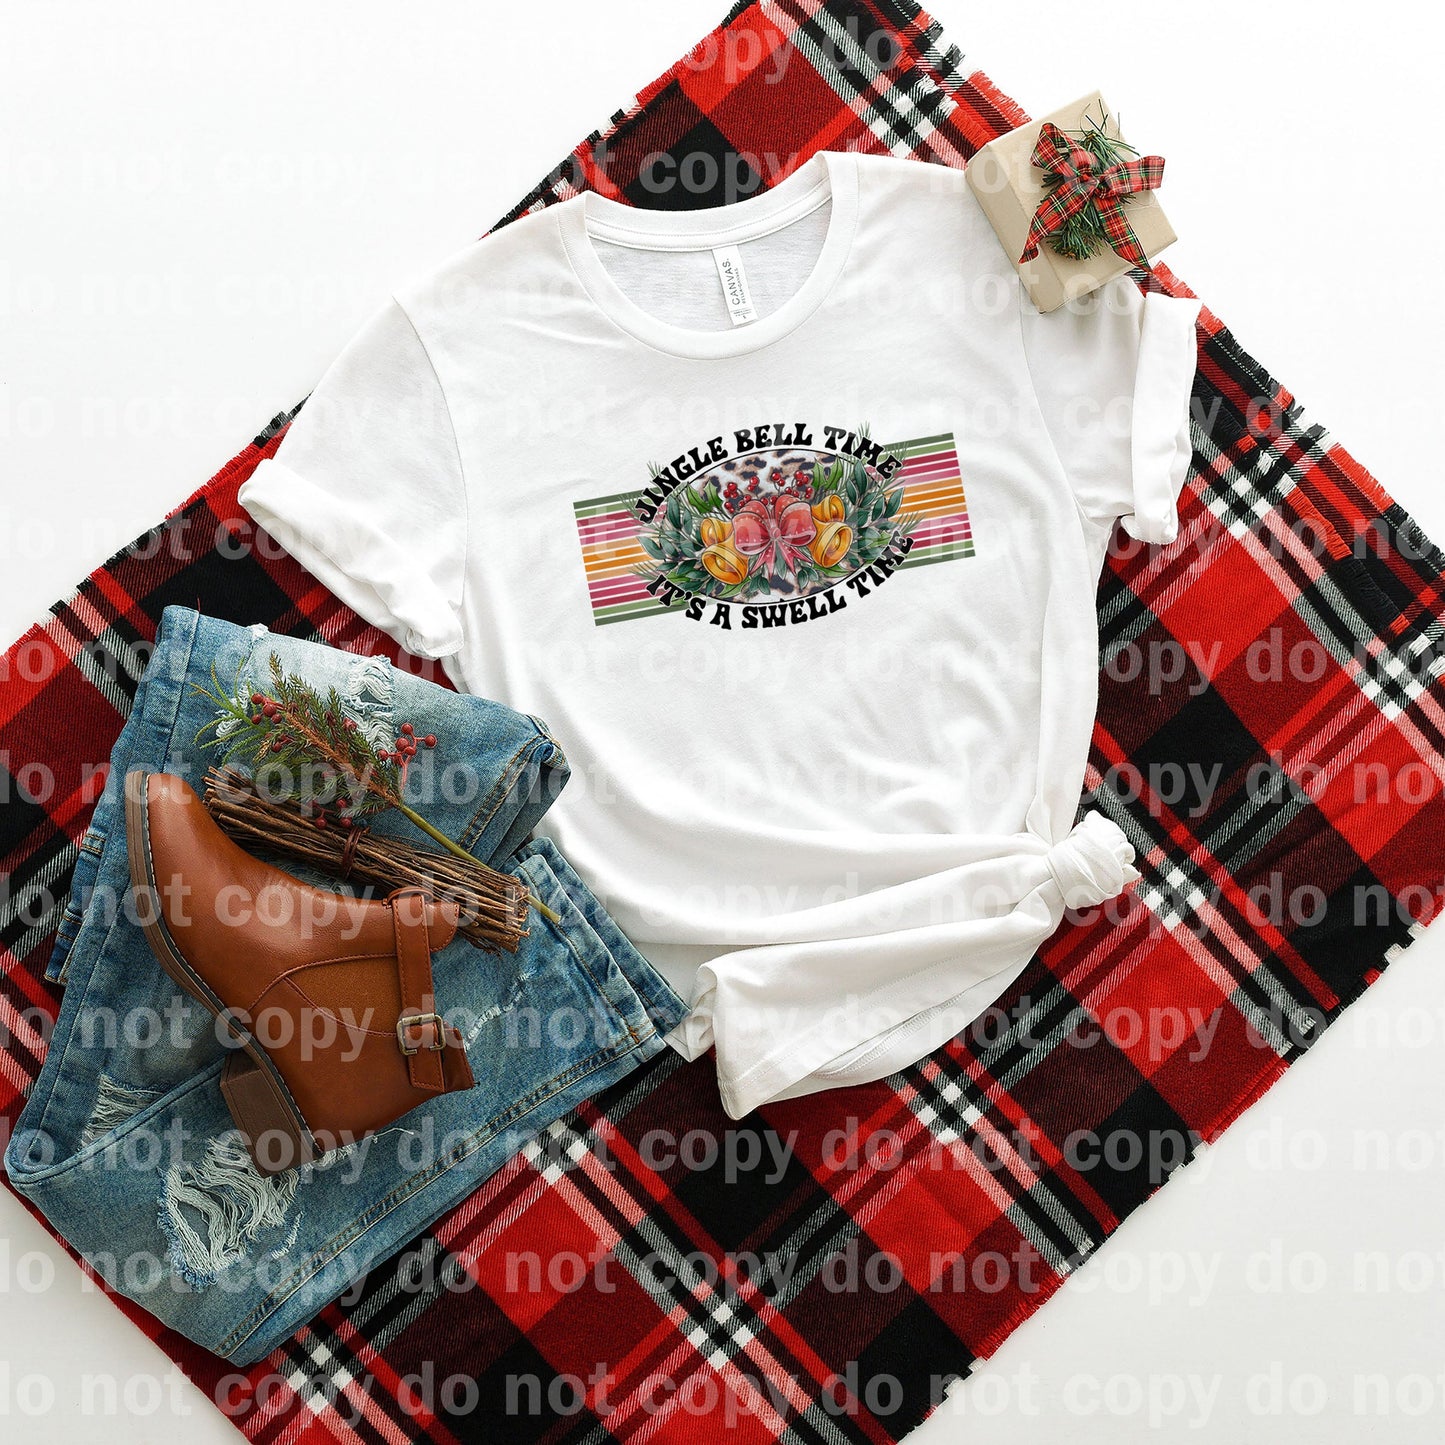 Jingle Bell Time It's A Swell Time Dream Print or Sublimation Print